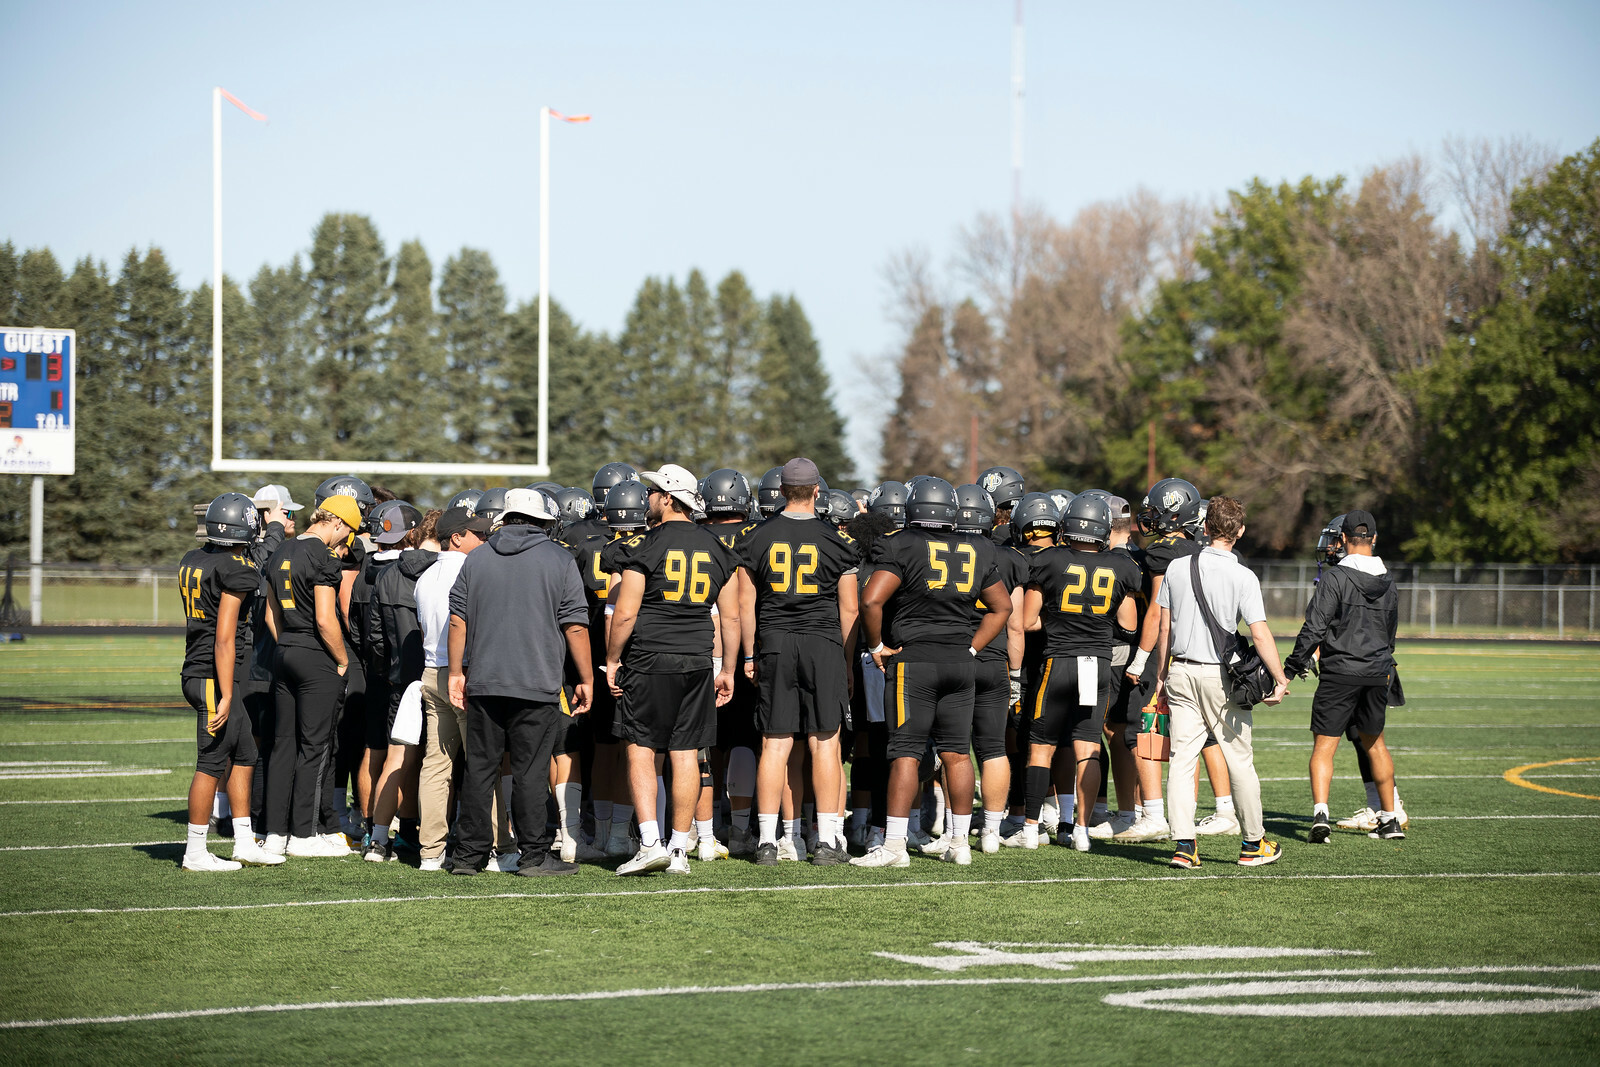 The Dordt football team during a huddle